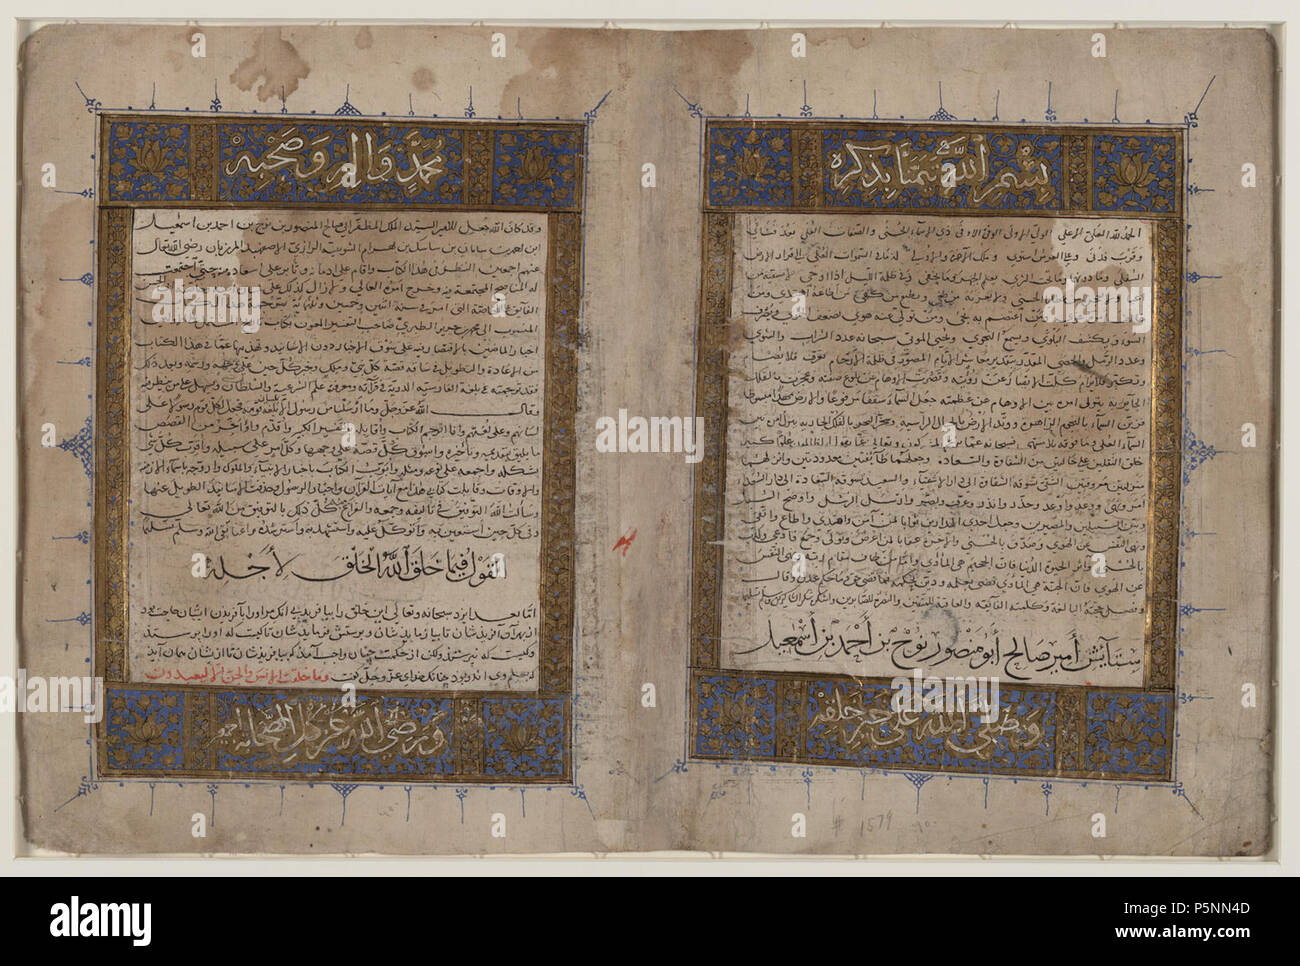 N/A. English: A manuscript of Tarikh-i Bal'ami, Bal'ami's Persian translation of al-Tabari's Tarikh. :             . 13 or 14 AD.   Muhammad Bal'ami  (–974)    Alternative names Muammad Ibn-Muammad Balam;        Description Persian historian, writer and vizier  Date of birth/death 10th century between 27 February 974 and 27 March 974  Work location Iran  Authority control  : Q2663540 VIAF:45495483 ISNI:0000 0000 6687 4828 LCCN:n88294155 GND:133573435 SUDOC:030821371 WorldCat    Calligrapher: Unknown 164 Bal'ami's Persian translation of al-Tabari's Tarikh Stock Photo